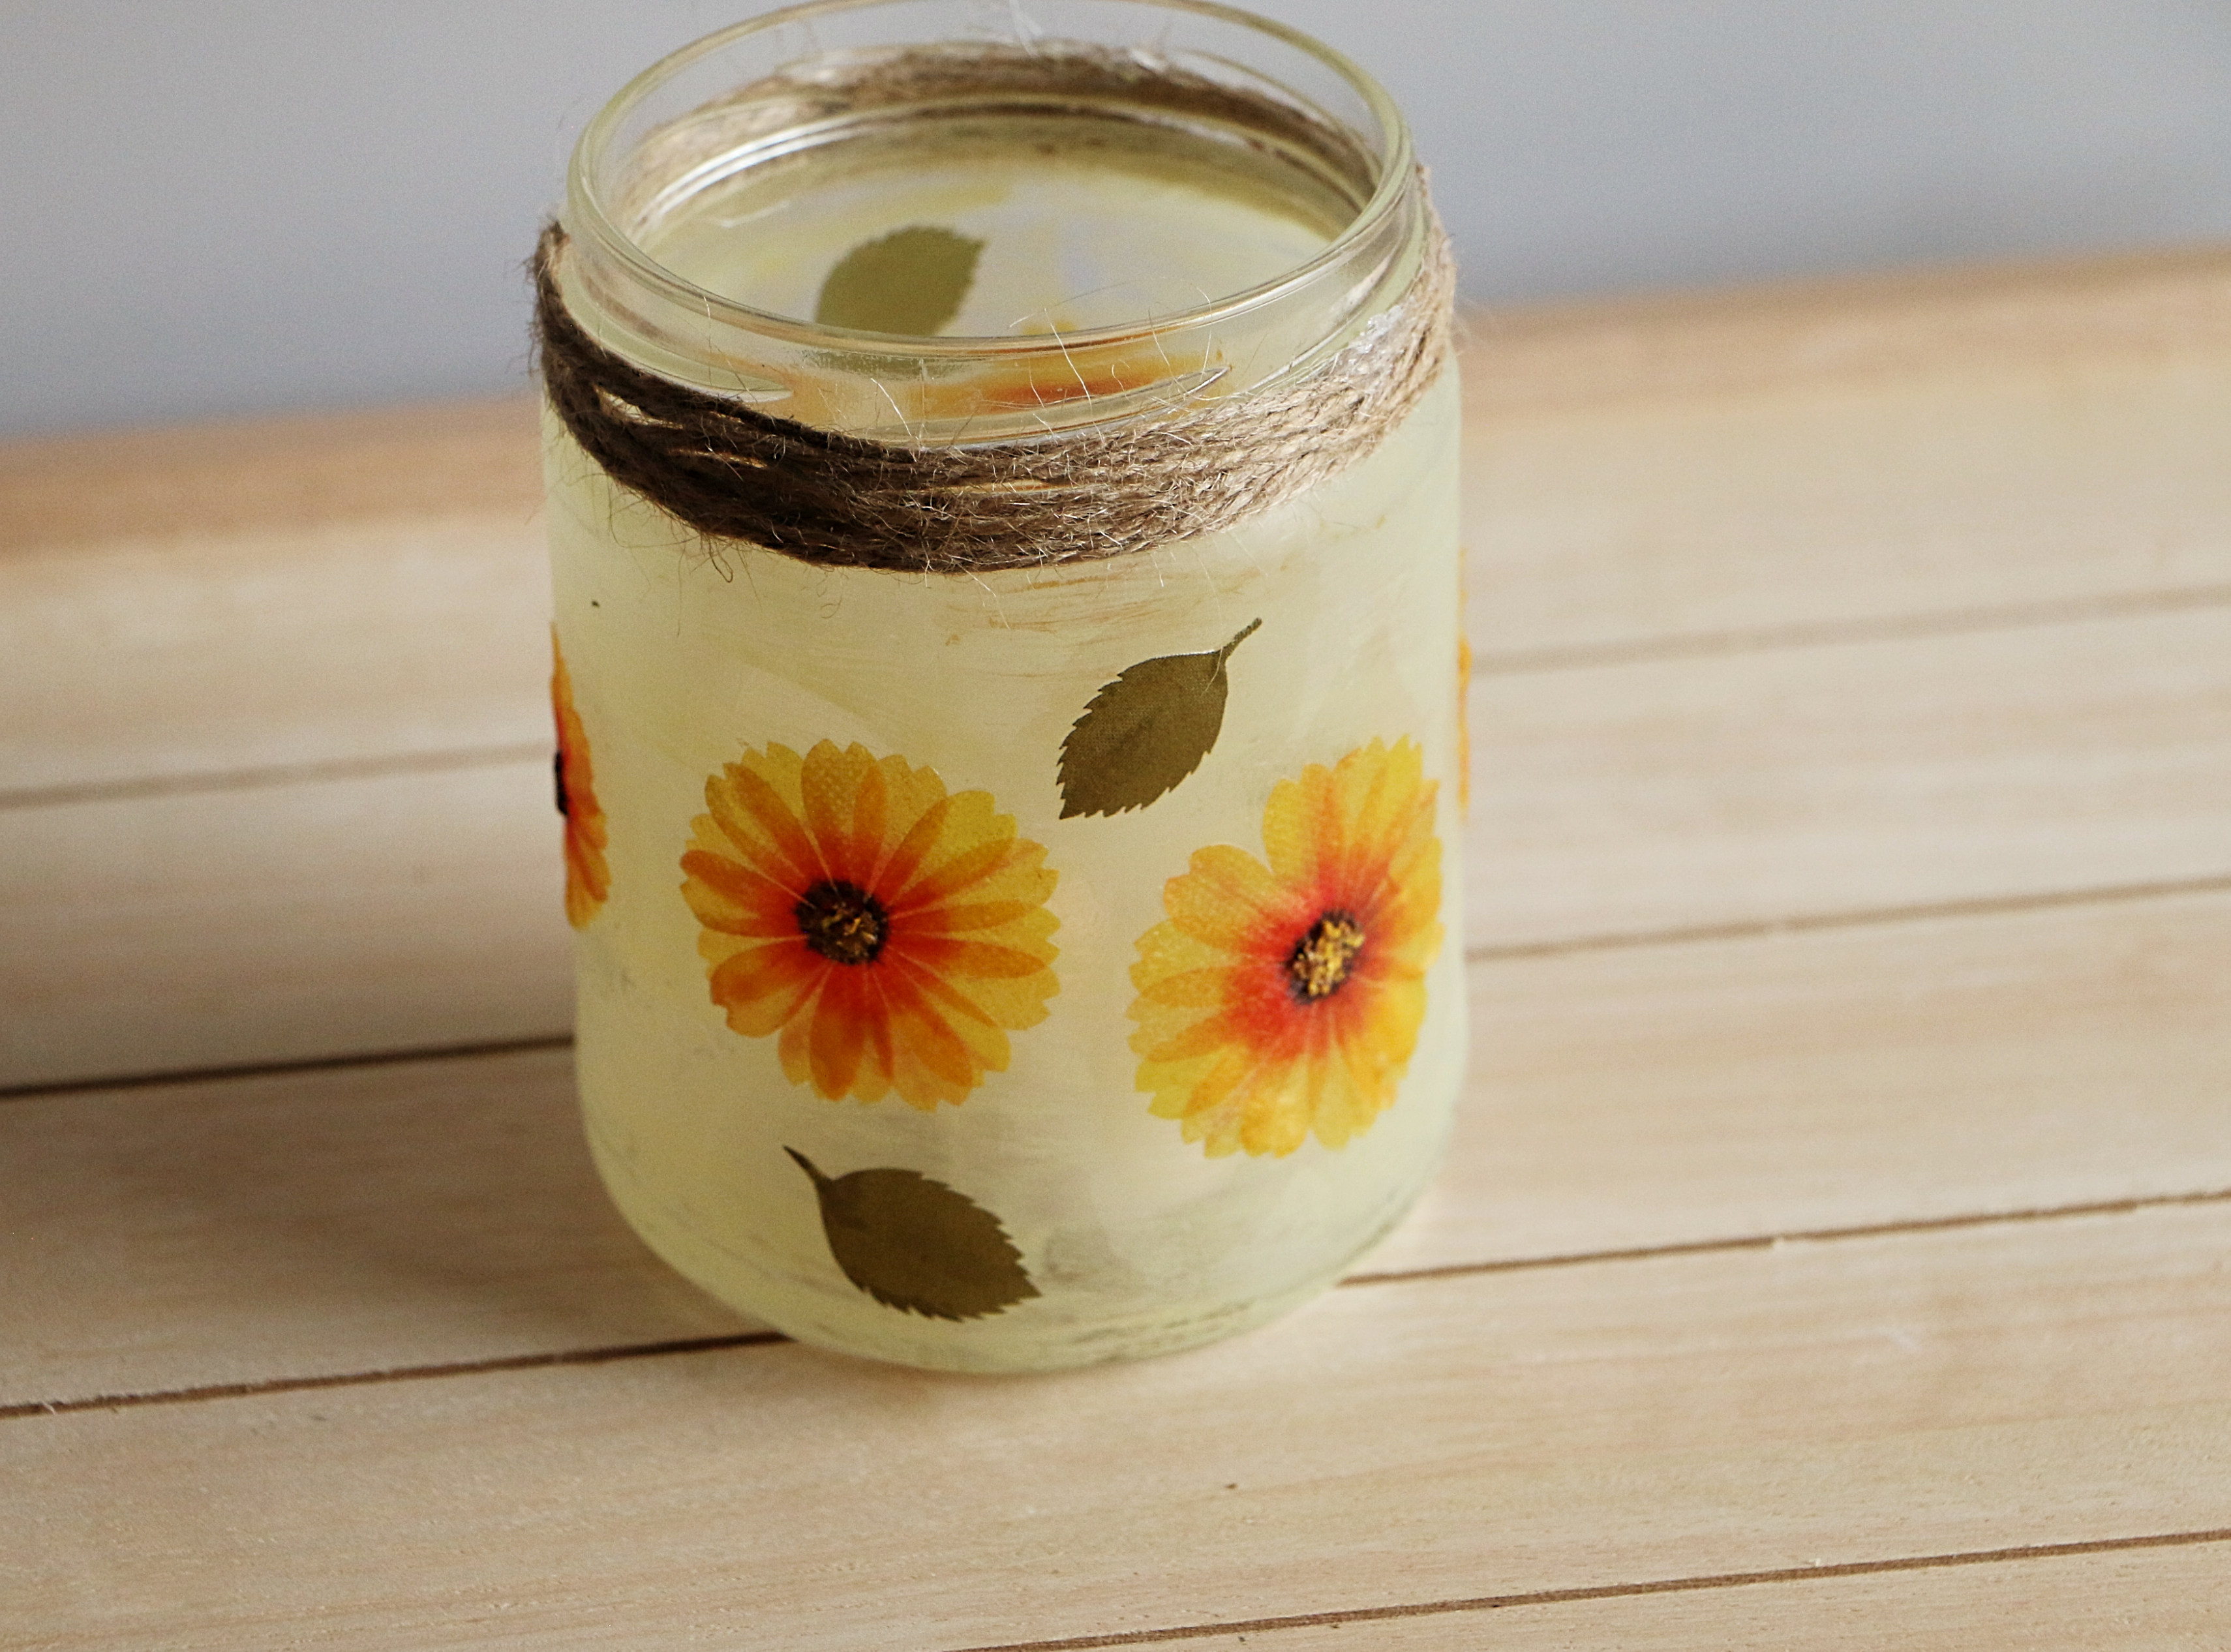 UPCYCLED GLASS JAR DESIGN WITH PAPER FLORAL EMBELLISHMENTS